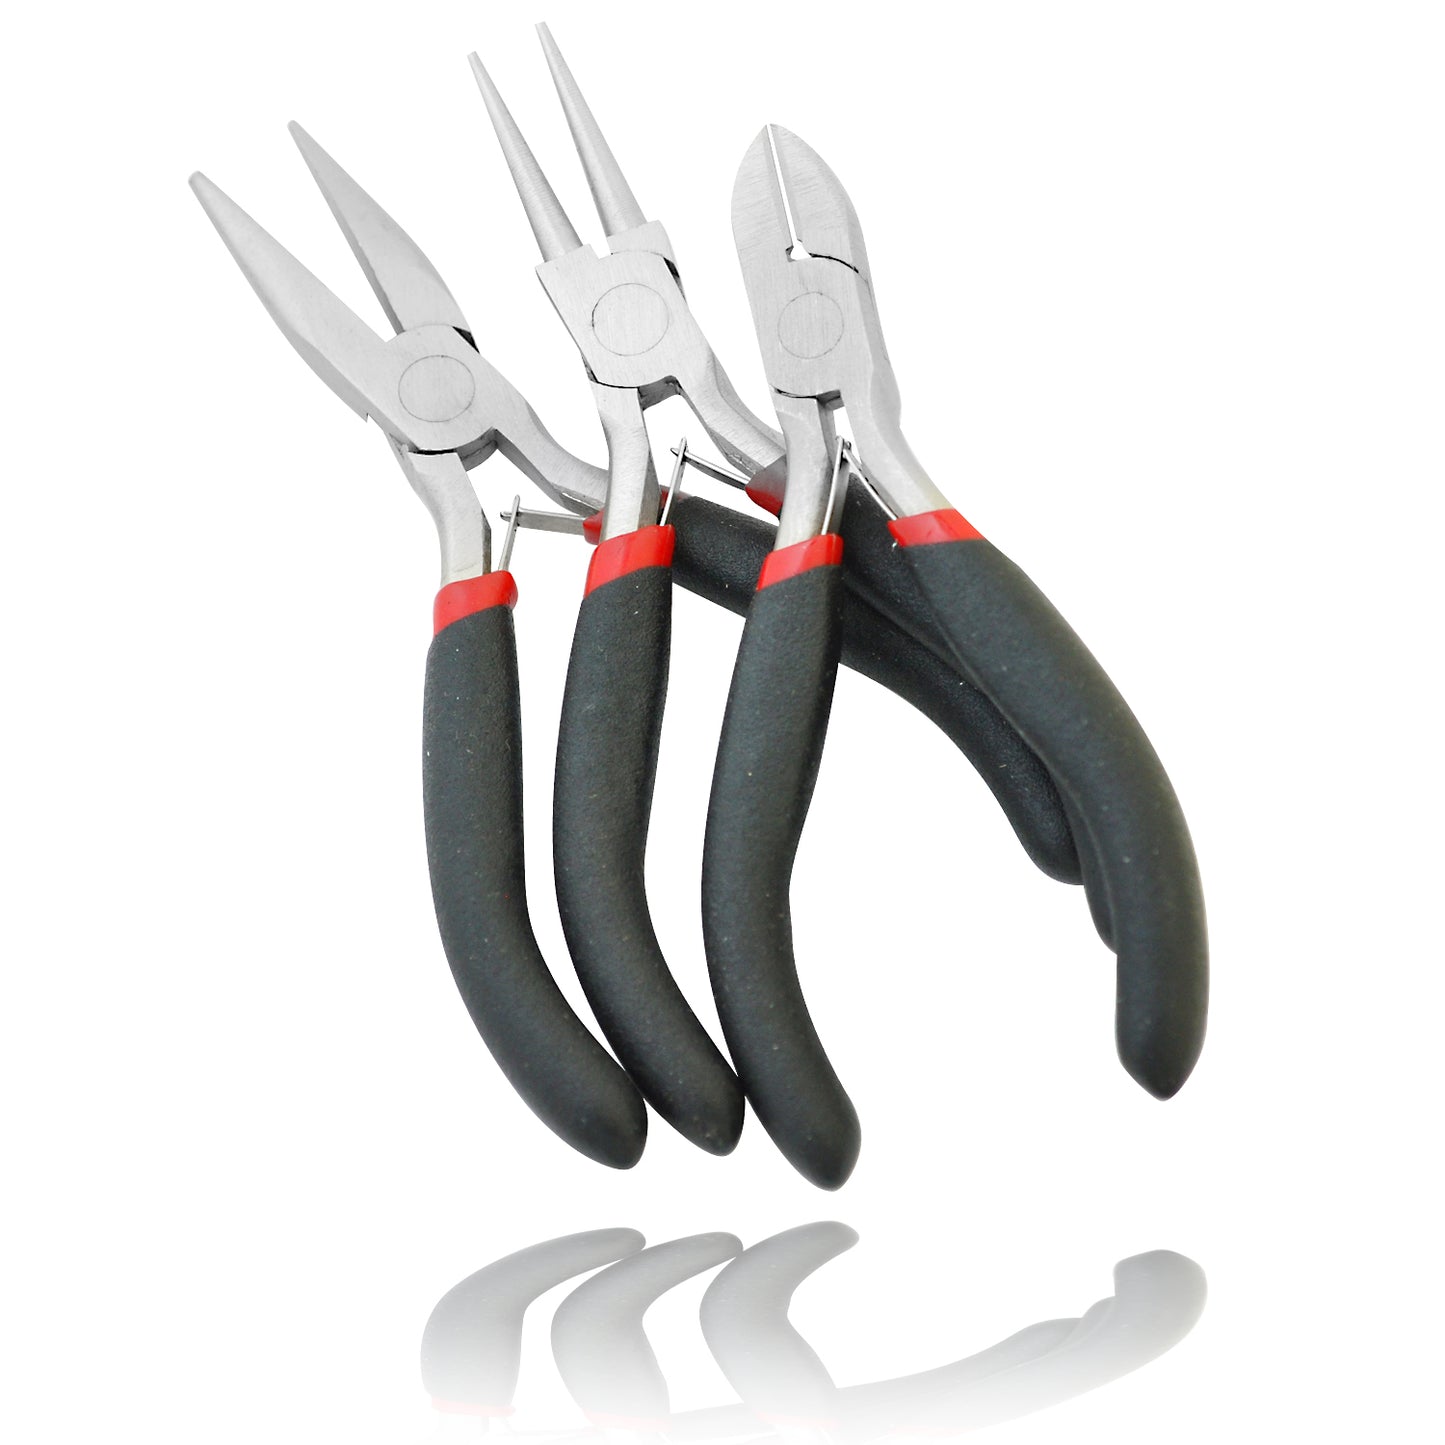 Set of 3 pliers for jewelry making / flat pliers / round pliers / side cutters